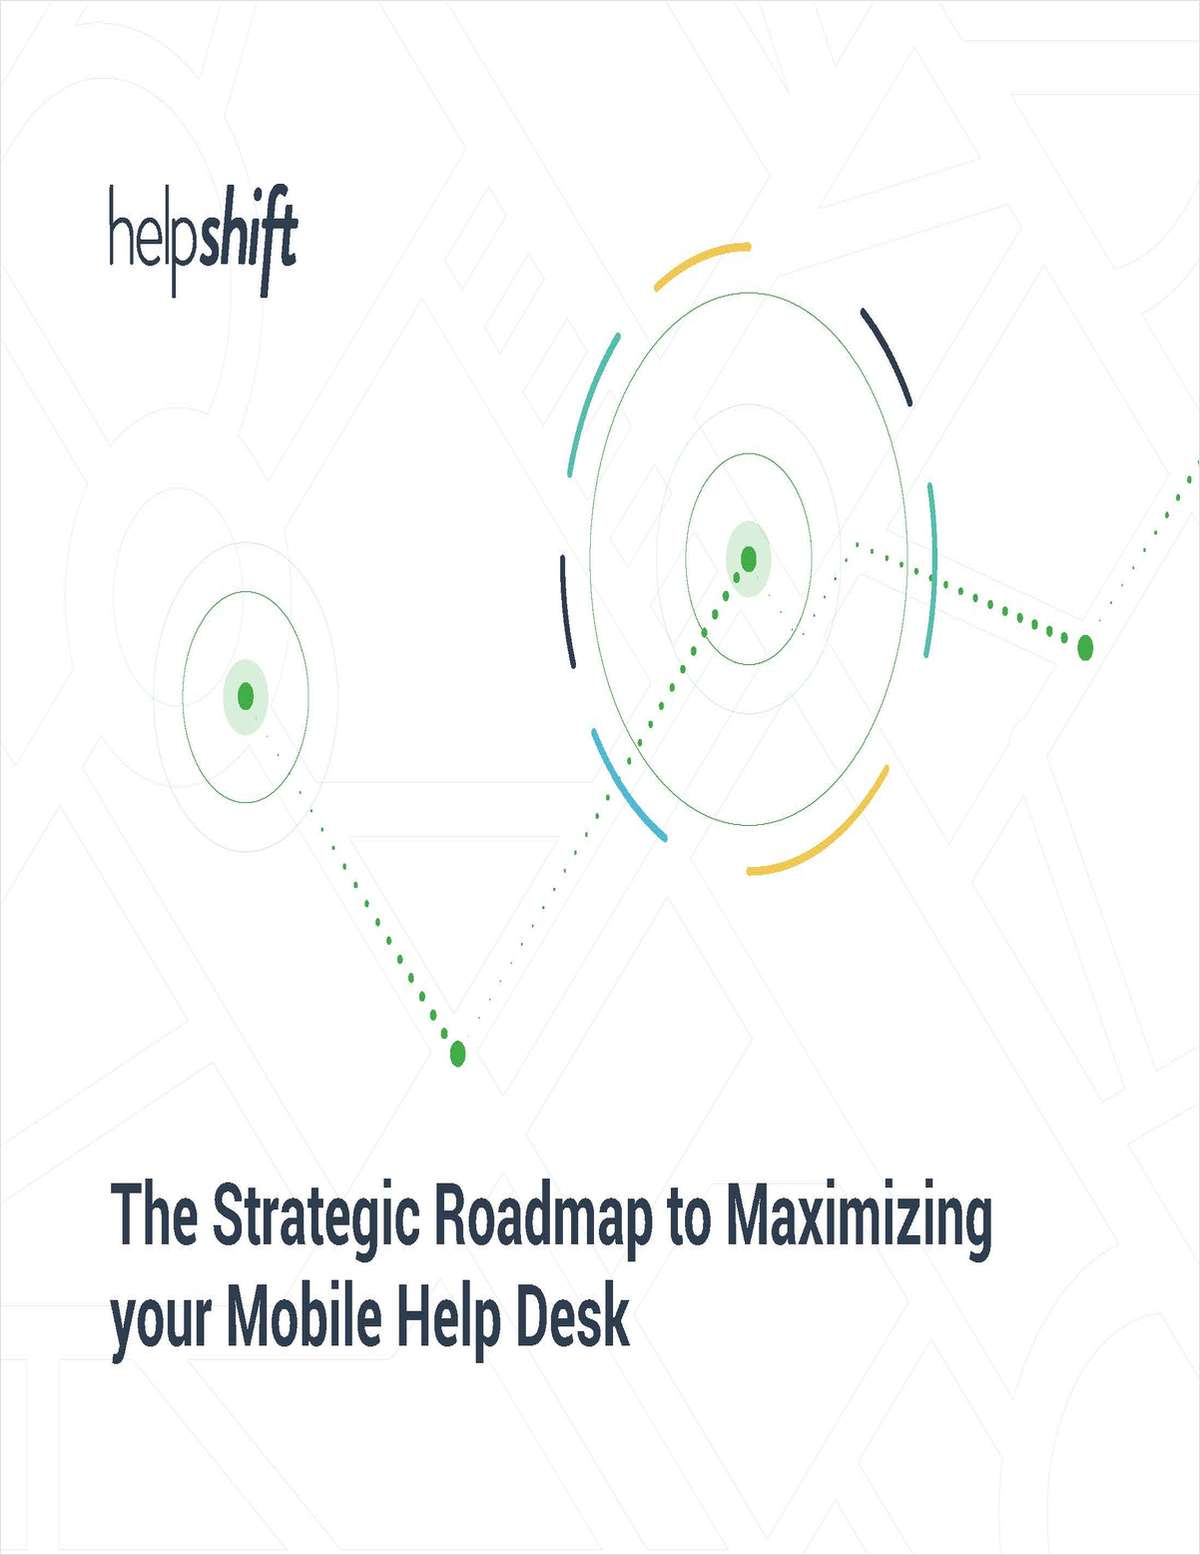 The Strategic Roadmap to Maximizing Your Mobile Help Desk